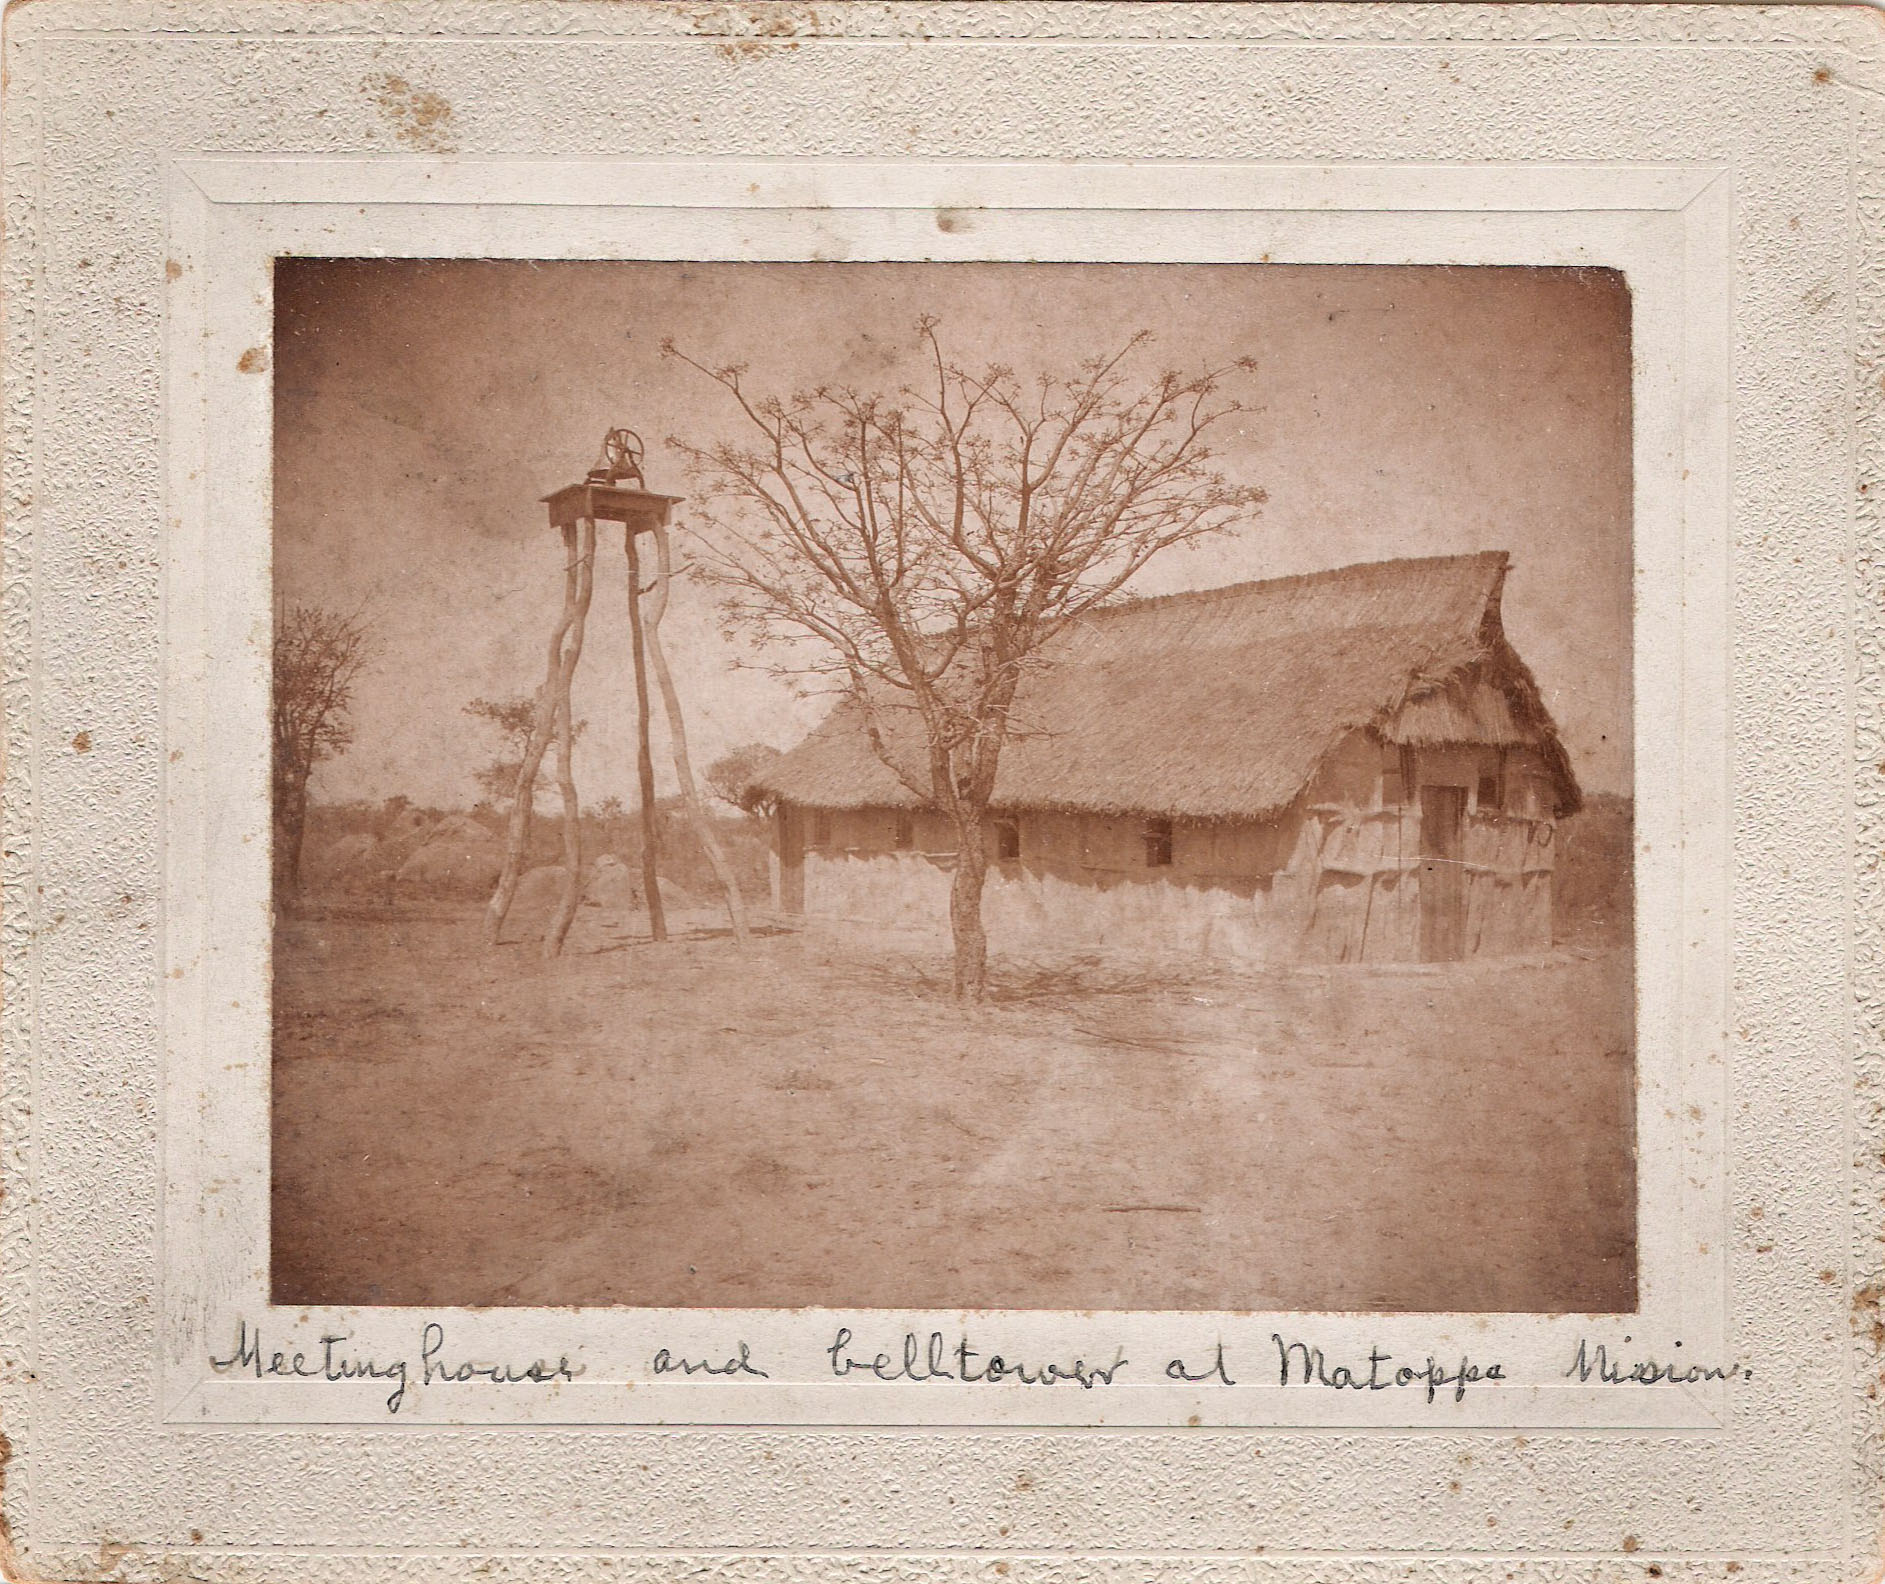 One of the earliest images captured by Brethren in Christ missionaries to then-Southern Rhodesia, this picture shows the first Brethren in Christ meeting house built at Matopo Mission in present-day Zimbabwe. (Brethren in Christ Historical Library and Archives)